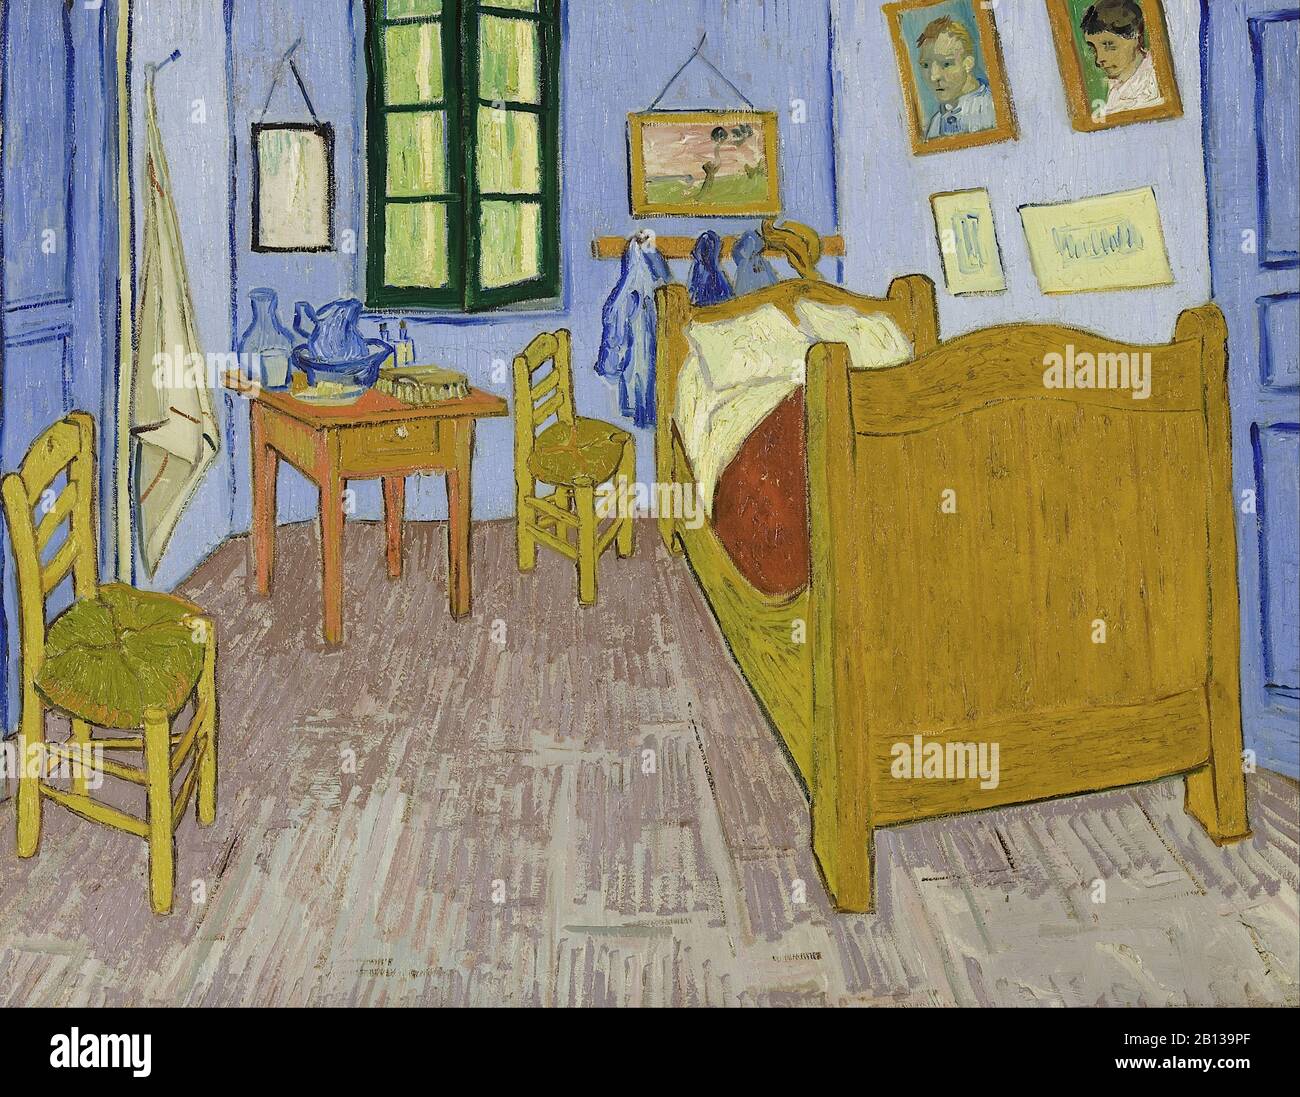 Van Gogh's Bedroom in Arles (The Bedroom), third (3rd) version, late September 1889 Vincent van Gogh painting - Very high resolution and quality image Stock Photo